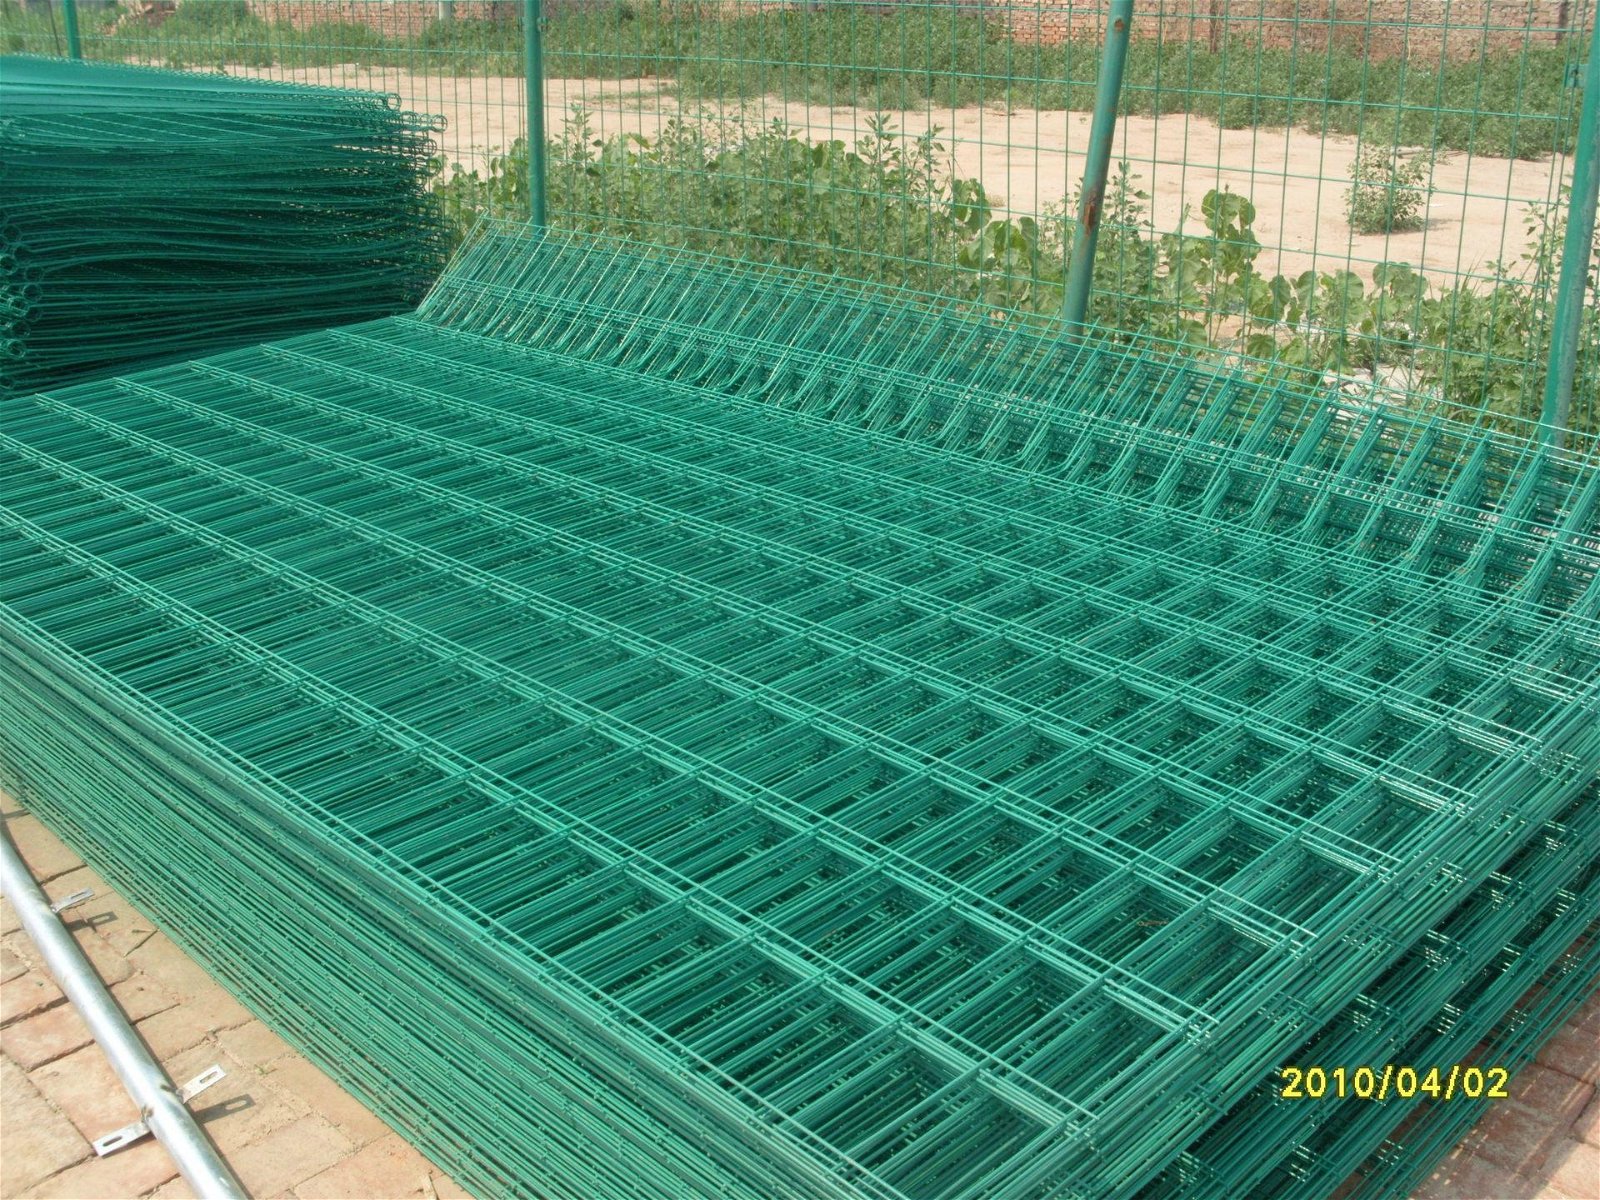 High quality Pvc coated framework wire mesh fencing 5